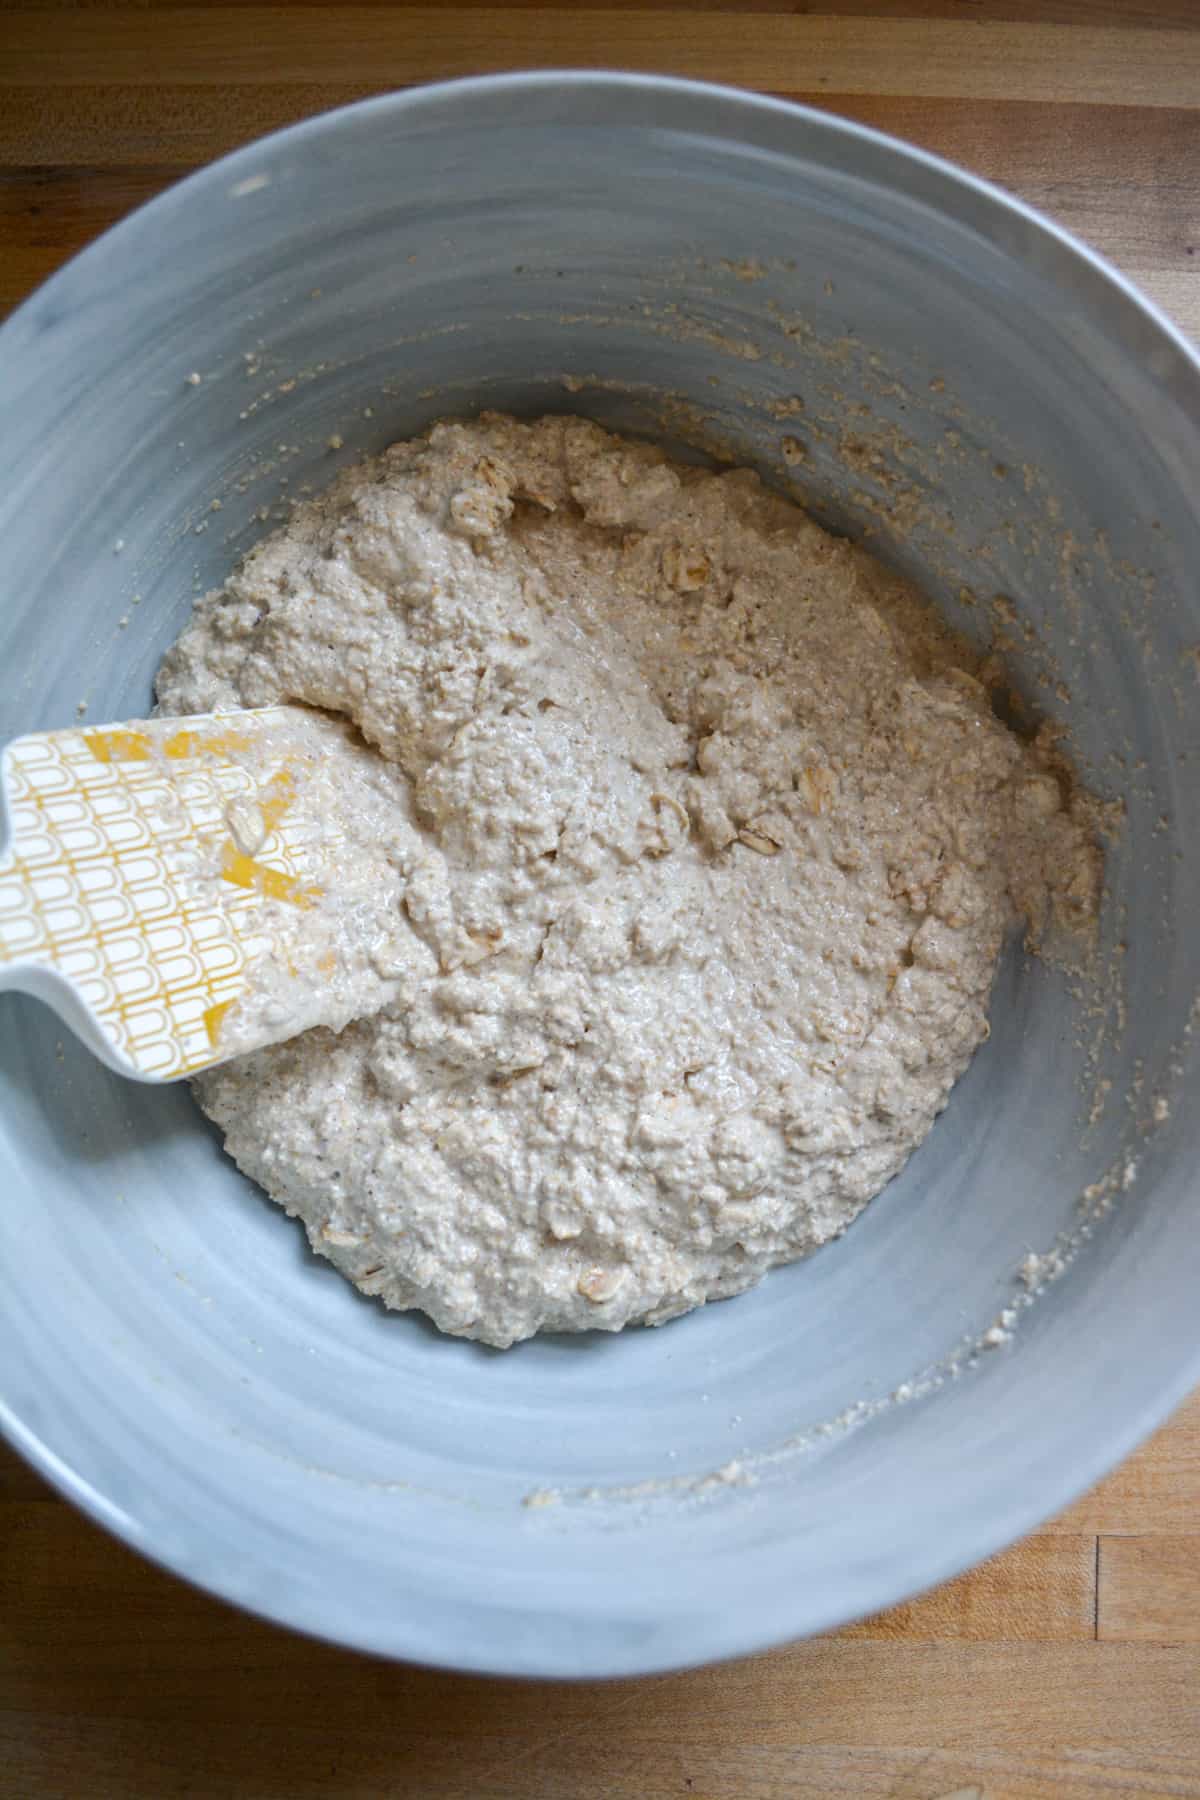 Homemade oat flour and rolled oats soaking in non-dairy milk in a mixing bowl.